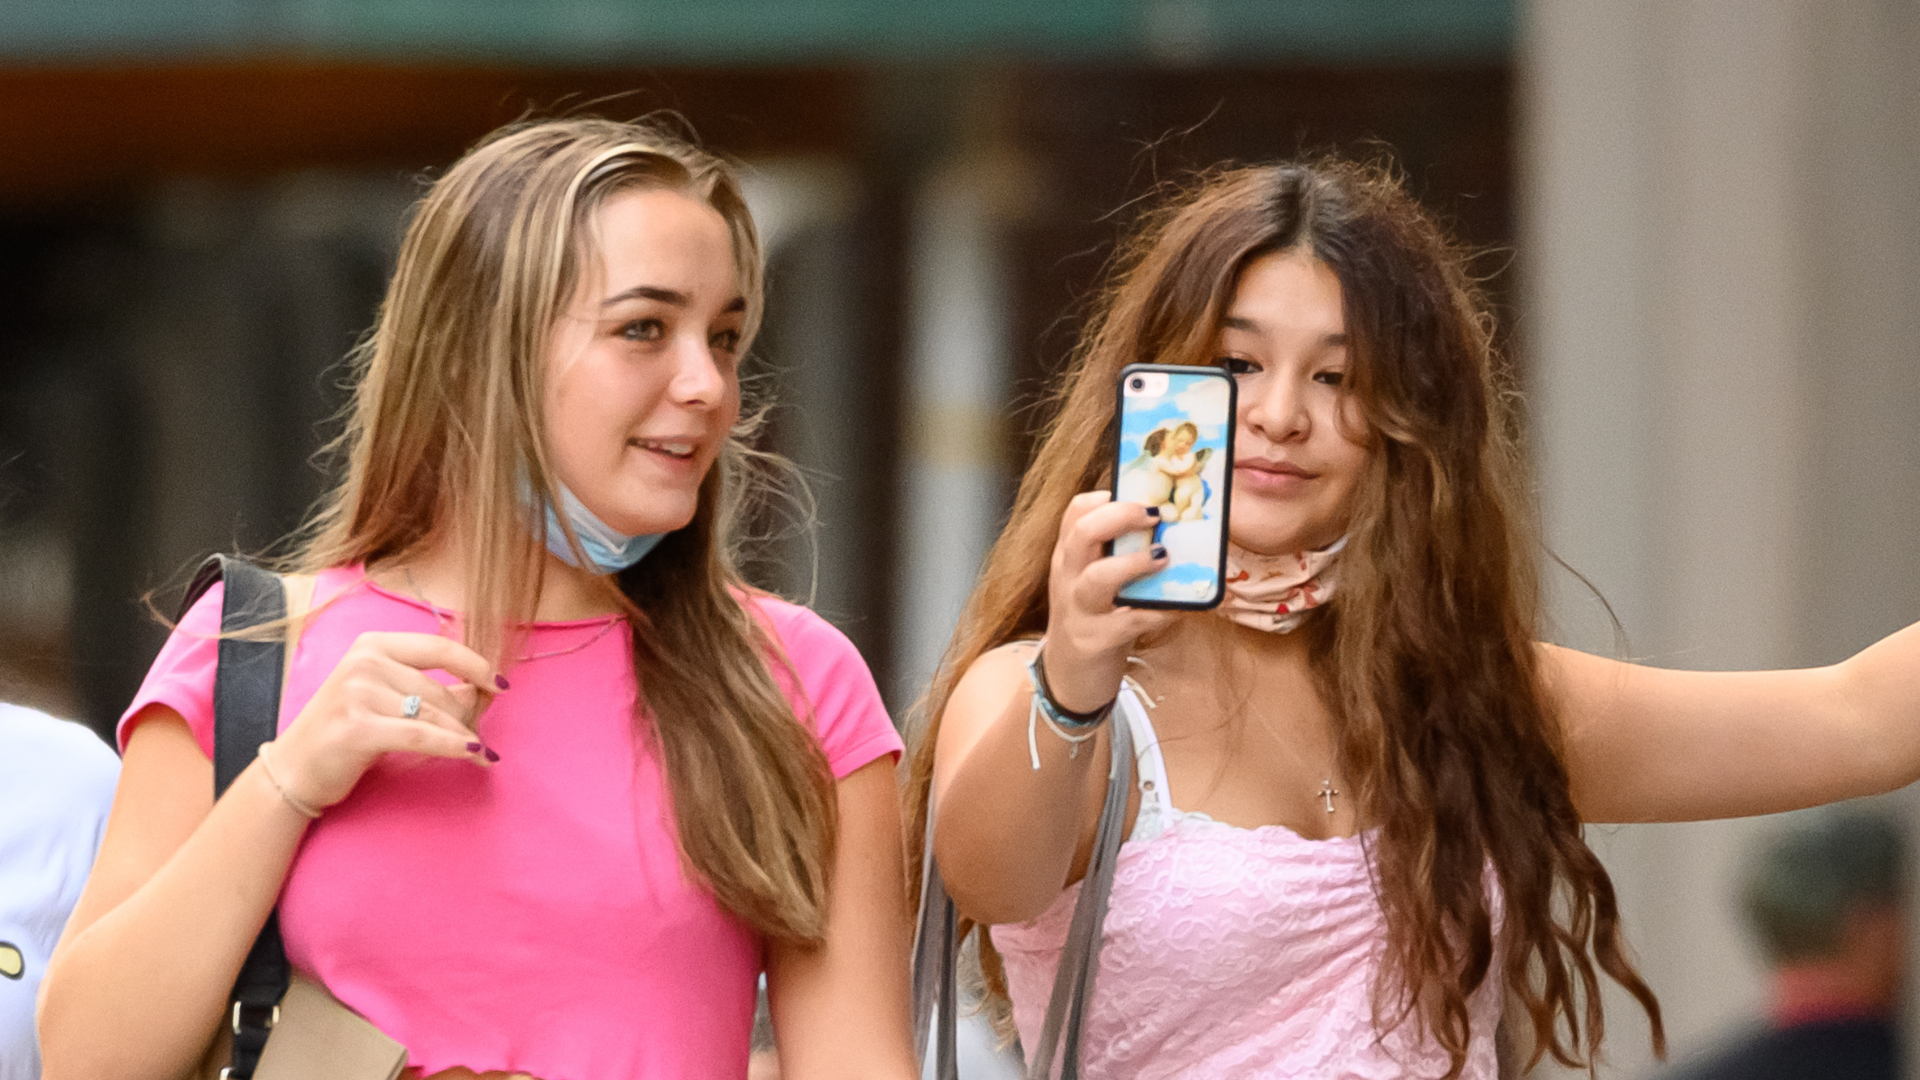 Two teen girls in pink tops. One holds a mobile phone in front of her as if taking a selfie.